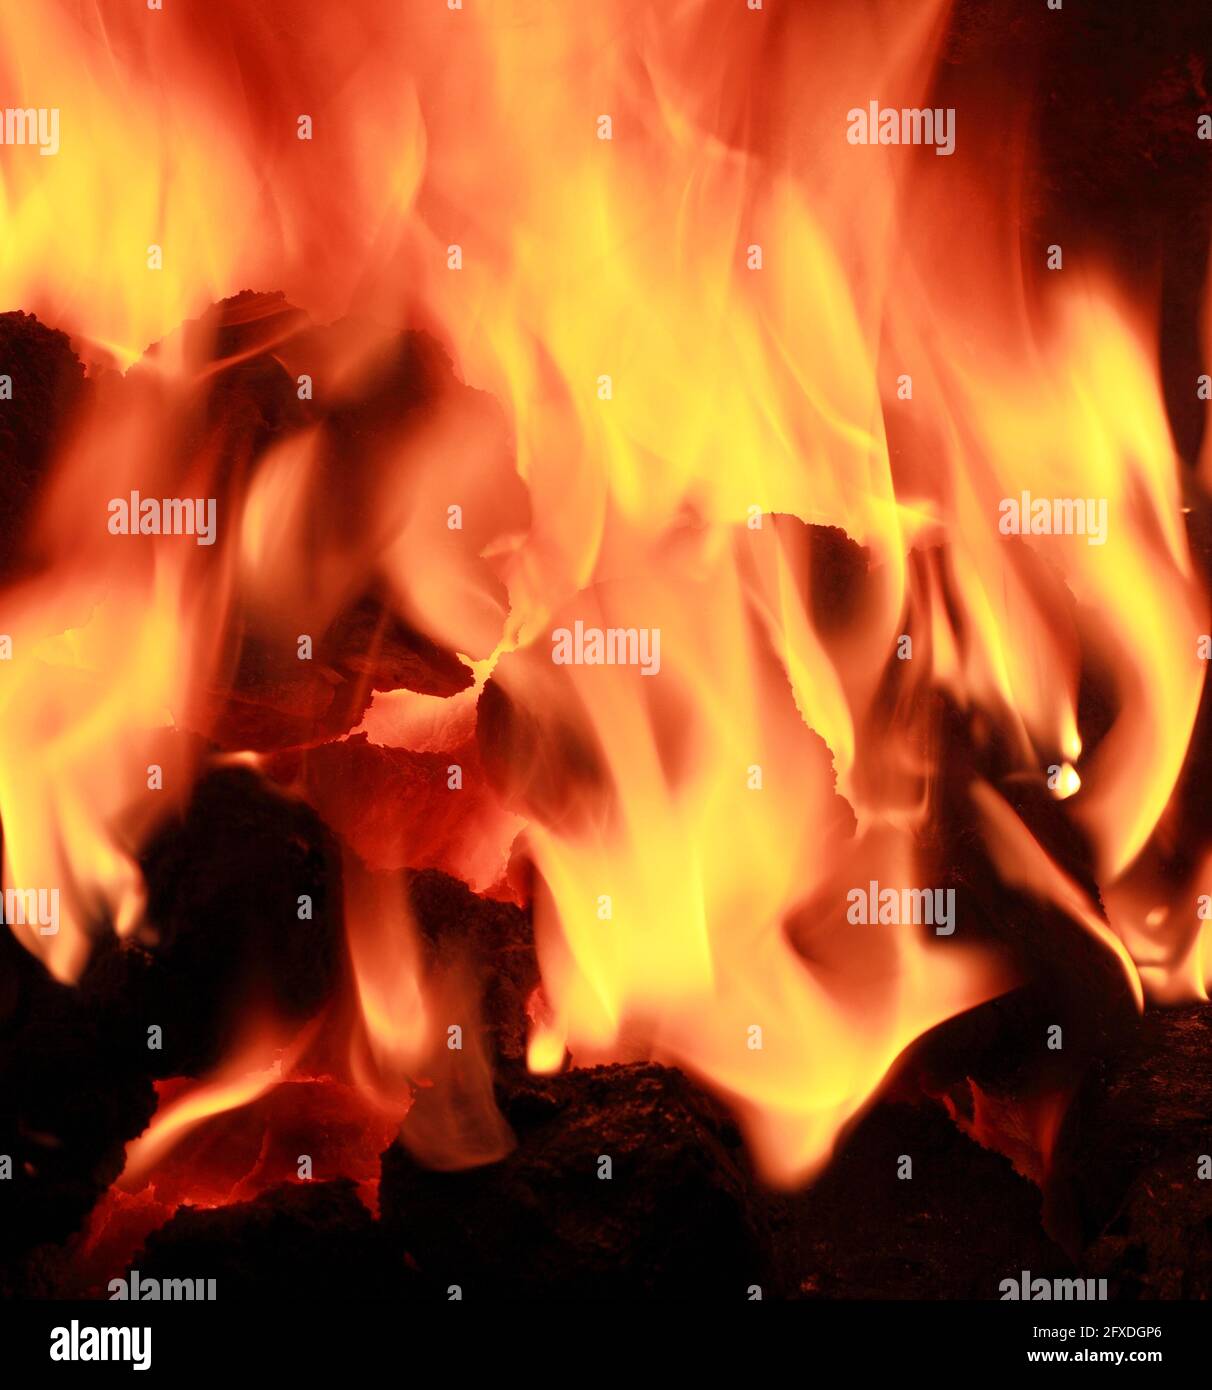 Domestic coal fire, burning, in hearth, fossil fuel, fuels, heat, warmth, flame, flames Stock Photo